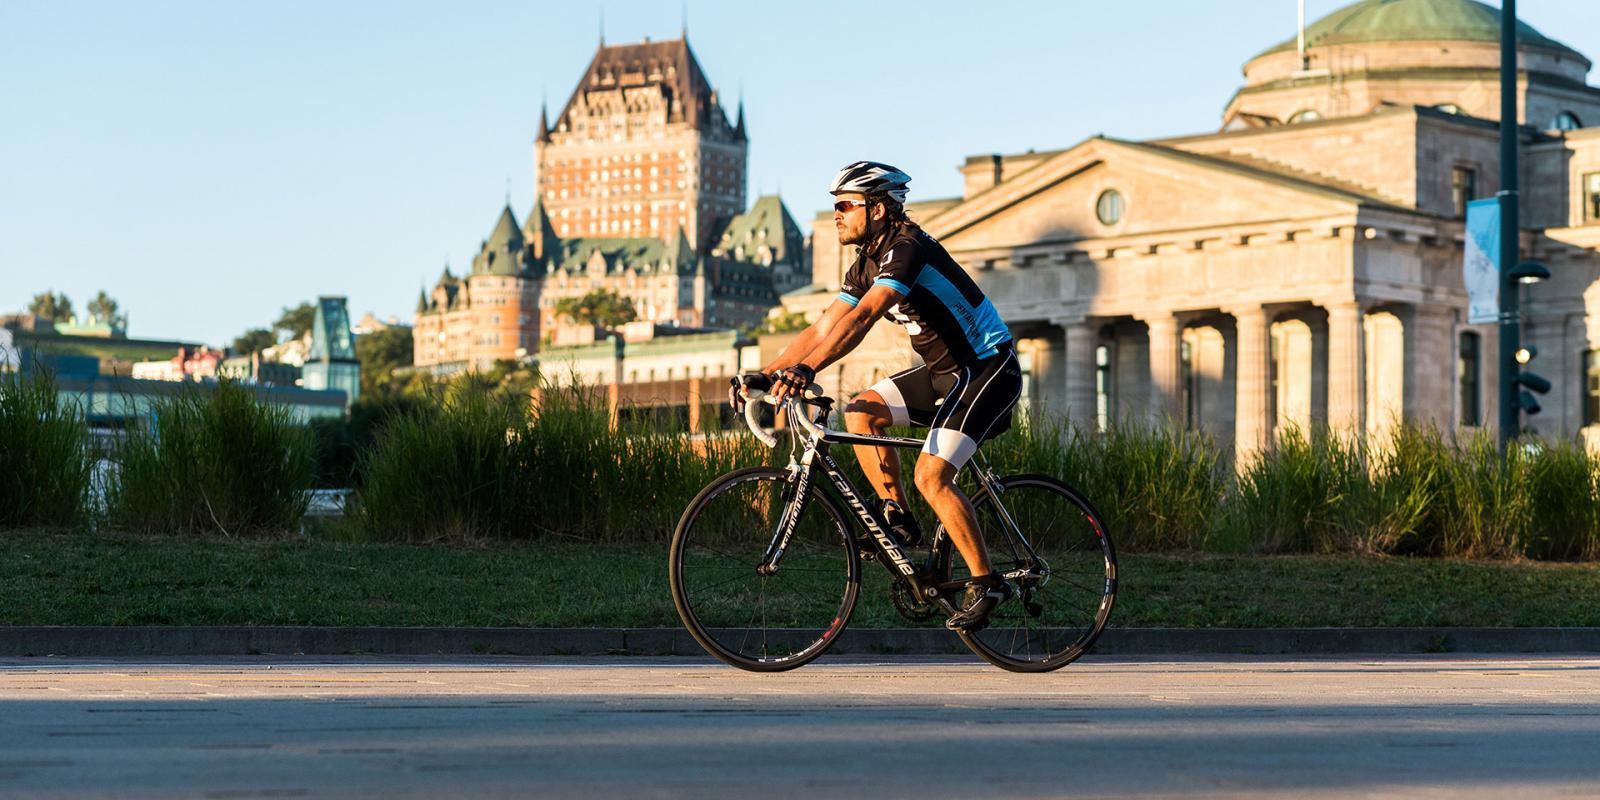 Quebec City plans to build massive 150-km cycling network